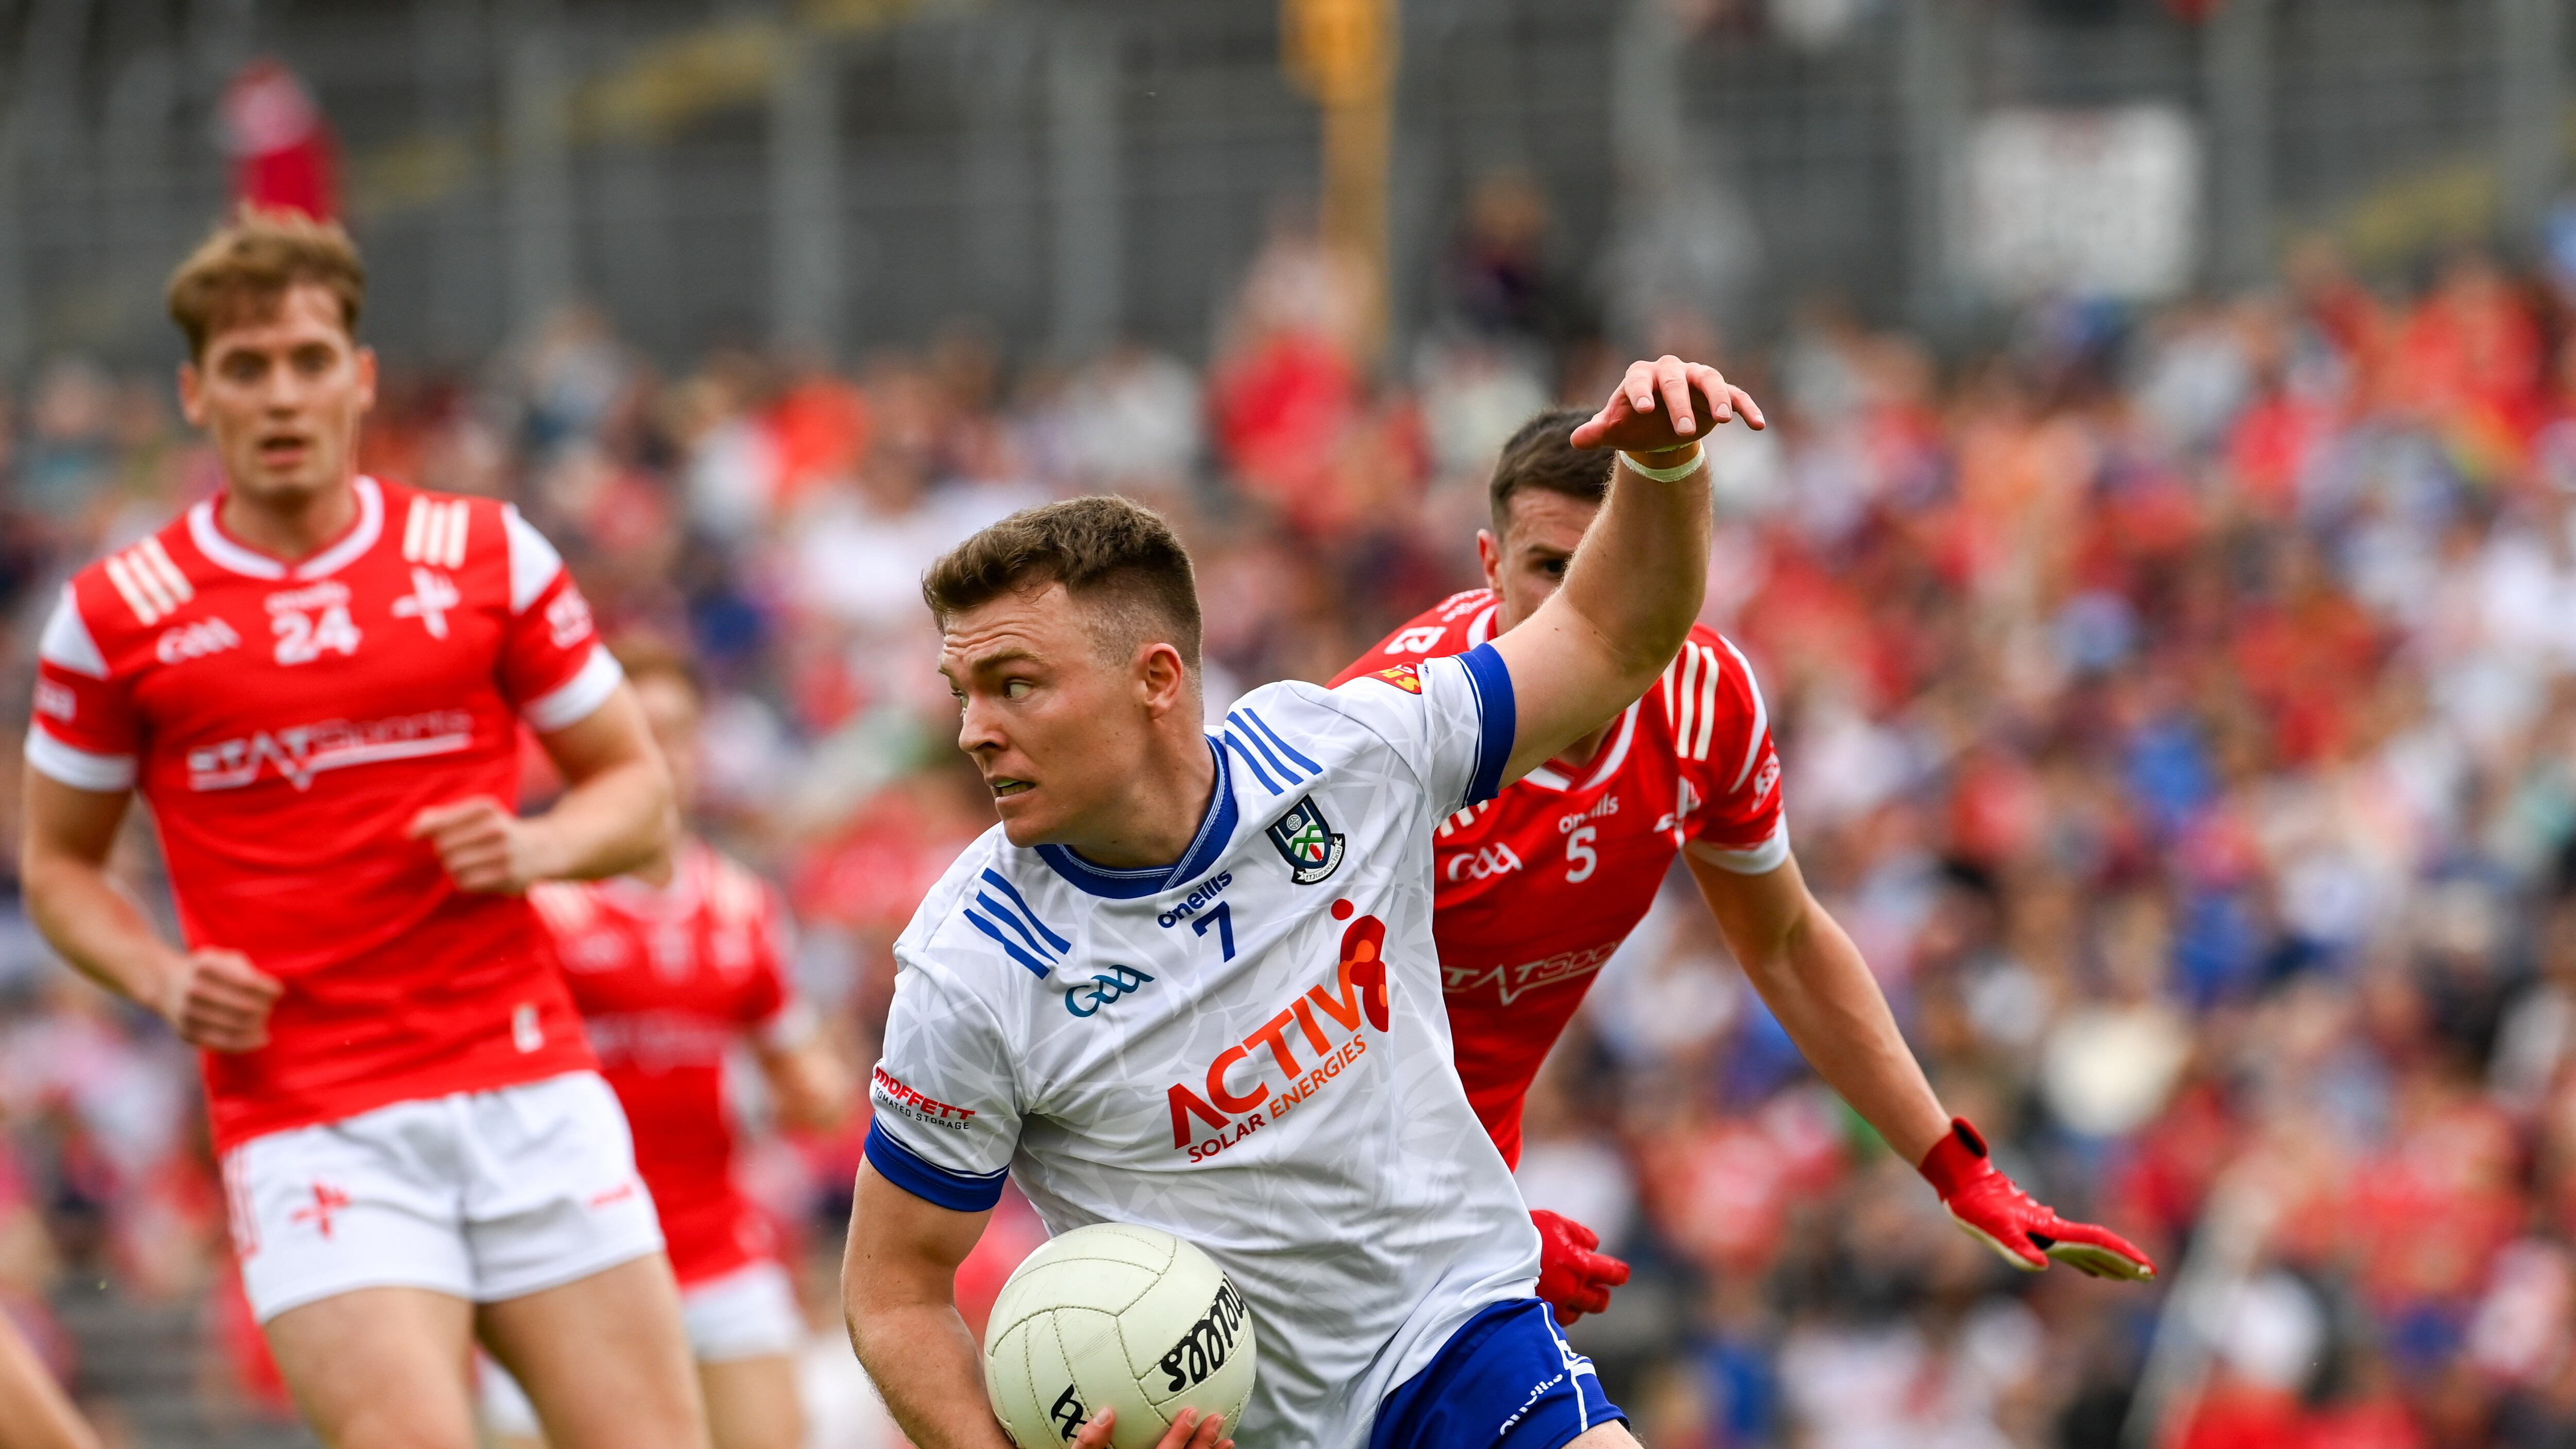 Conor McCarthy of Monaghan in action against Louth.